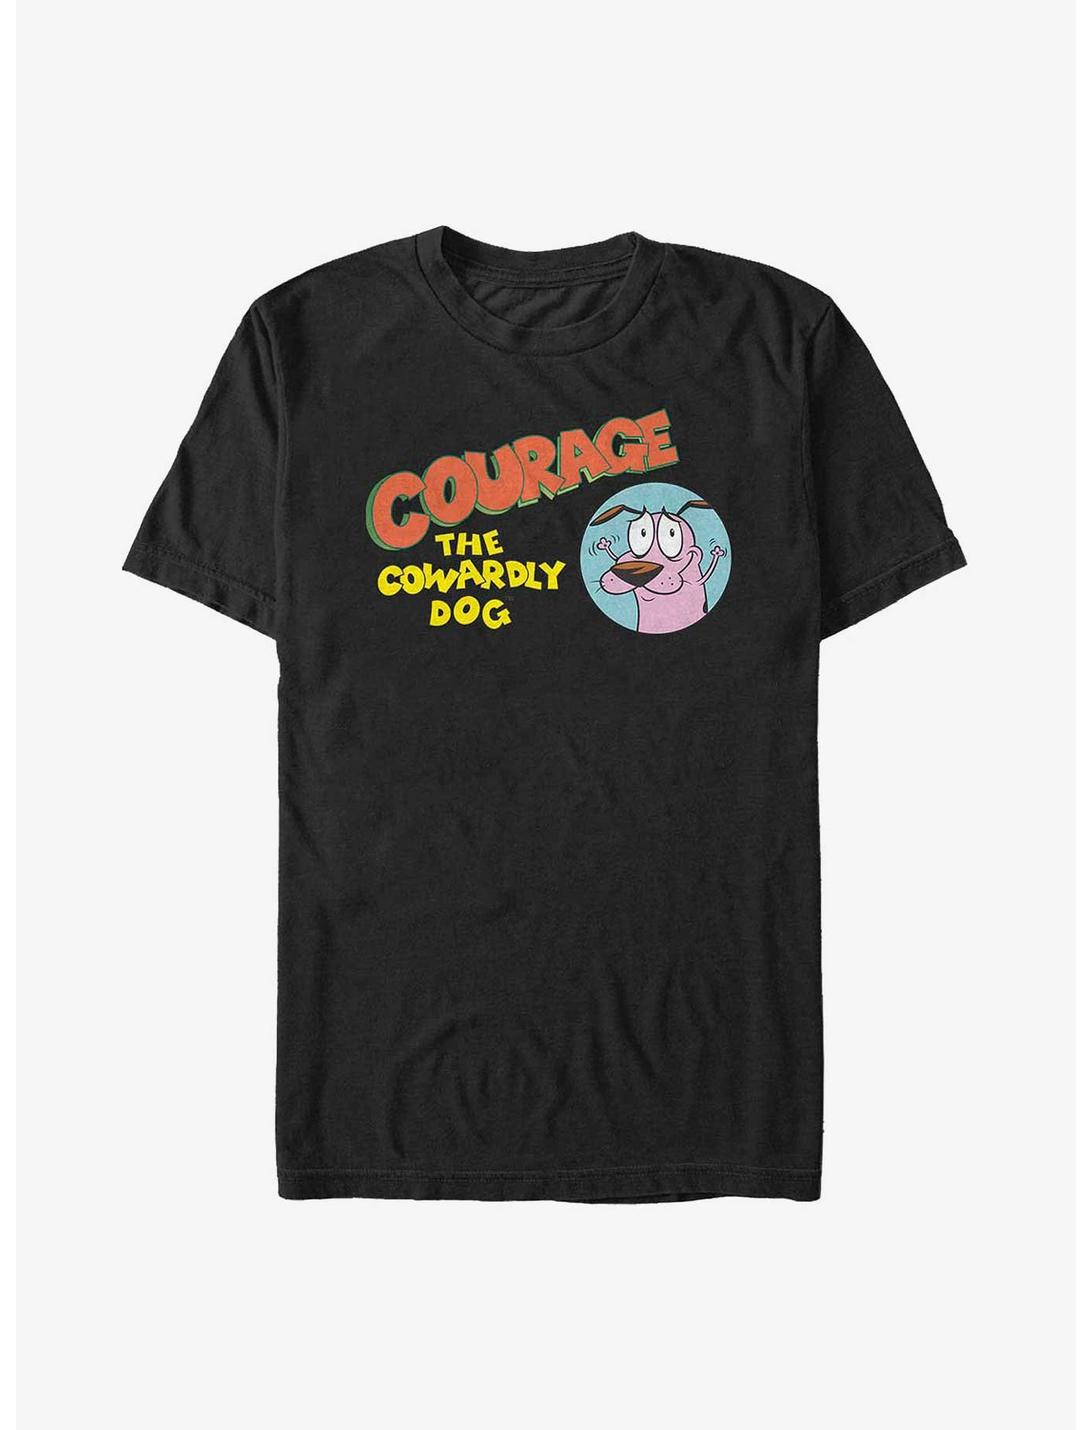 Courage The Cowardly Dog Courage Logo Big & Tall T-Shirt, BLACK, hi-res